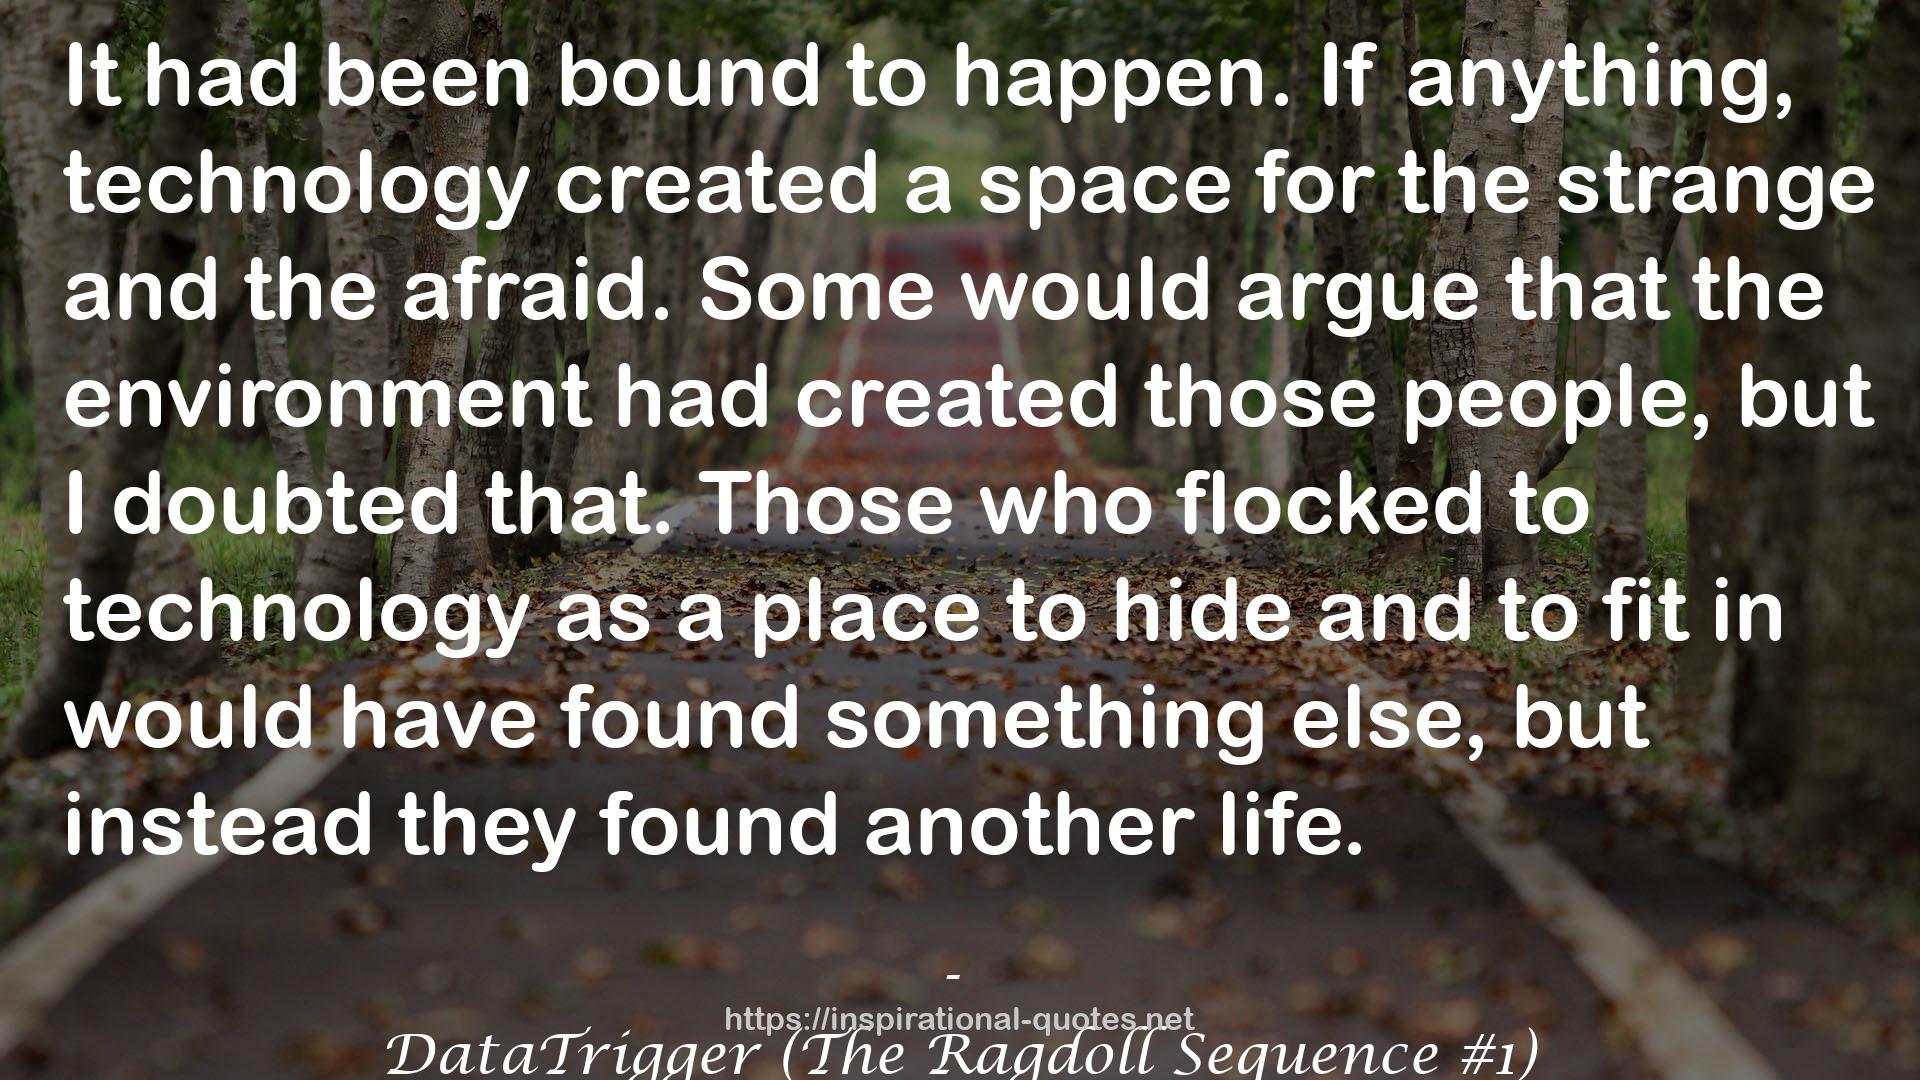 DataTrigger (The Ragdoll Sequence #1) QUOTES